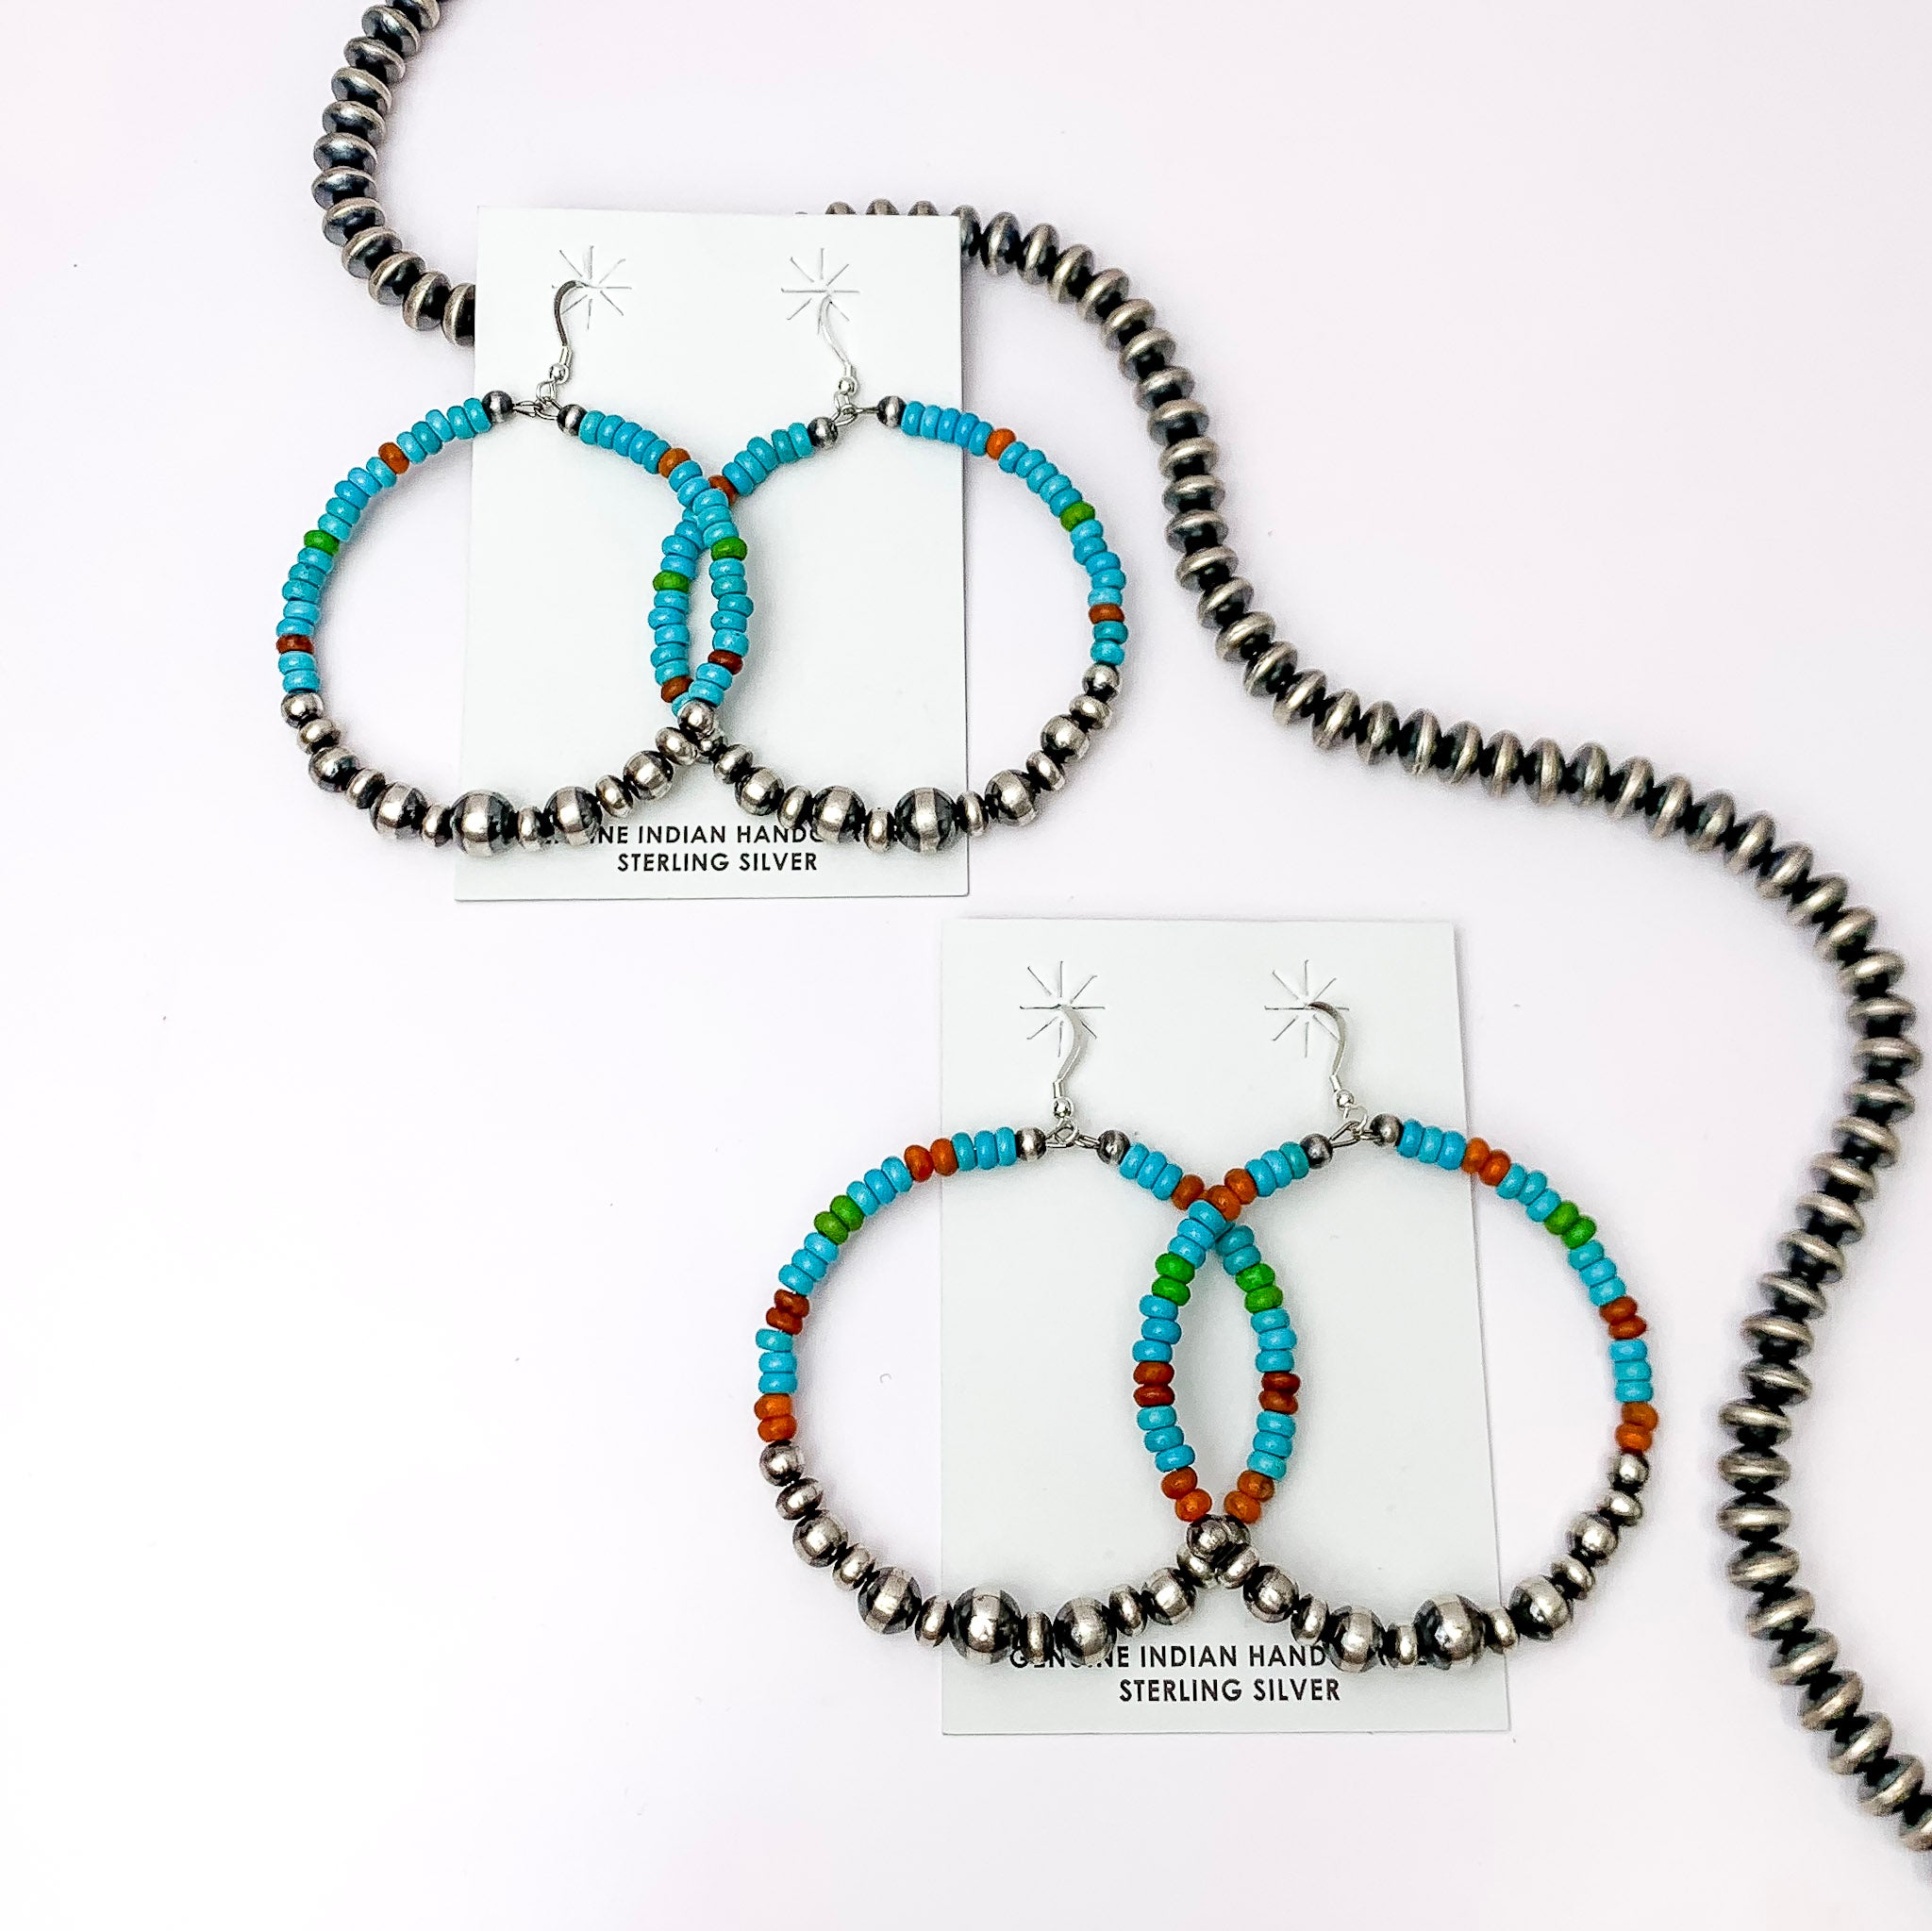 Centered in the picture is 2 pair of turquoise and navajo pearl beaded earrings on a white background. 